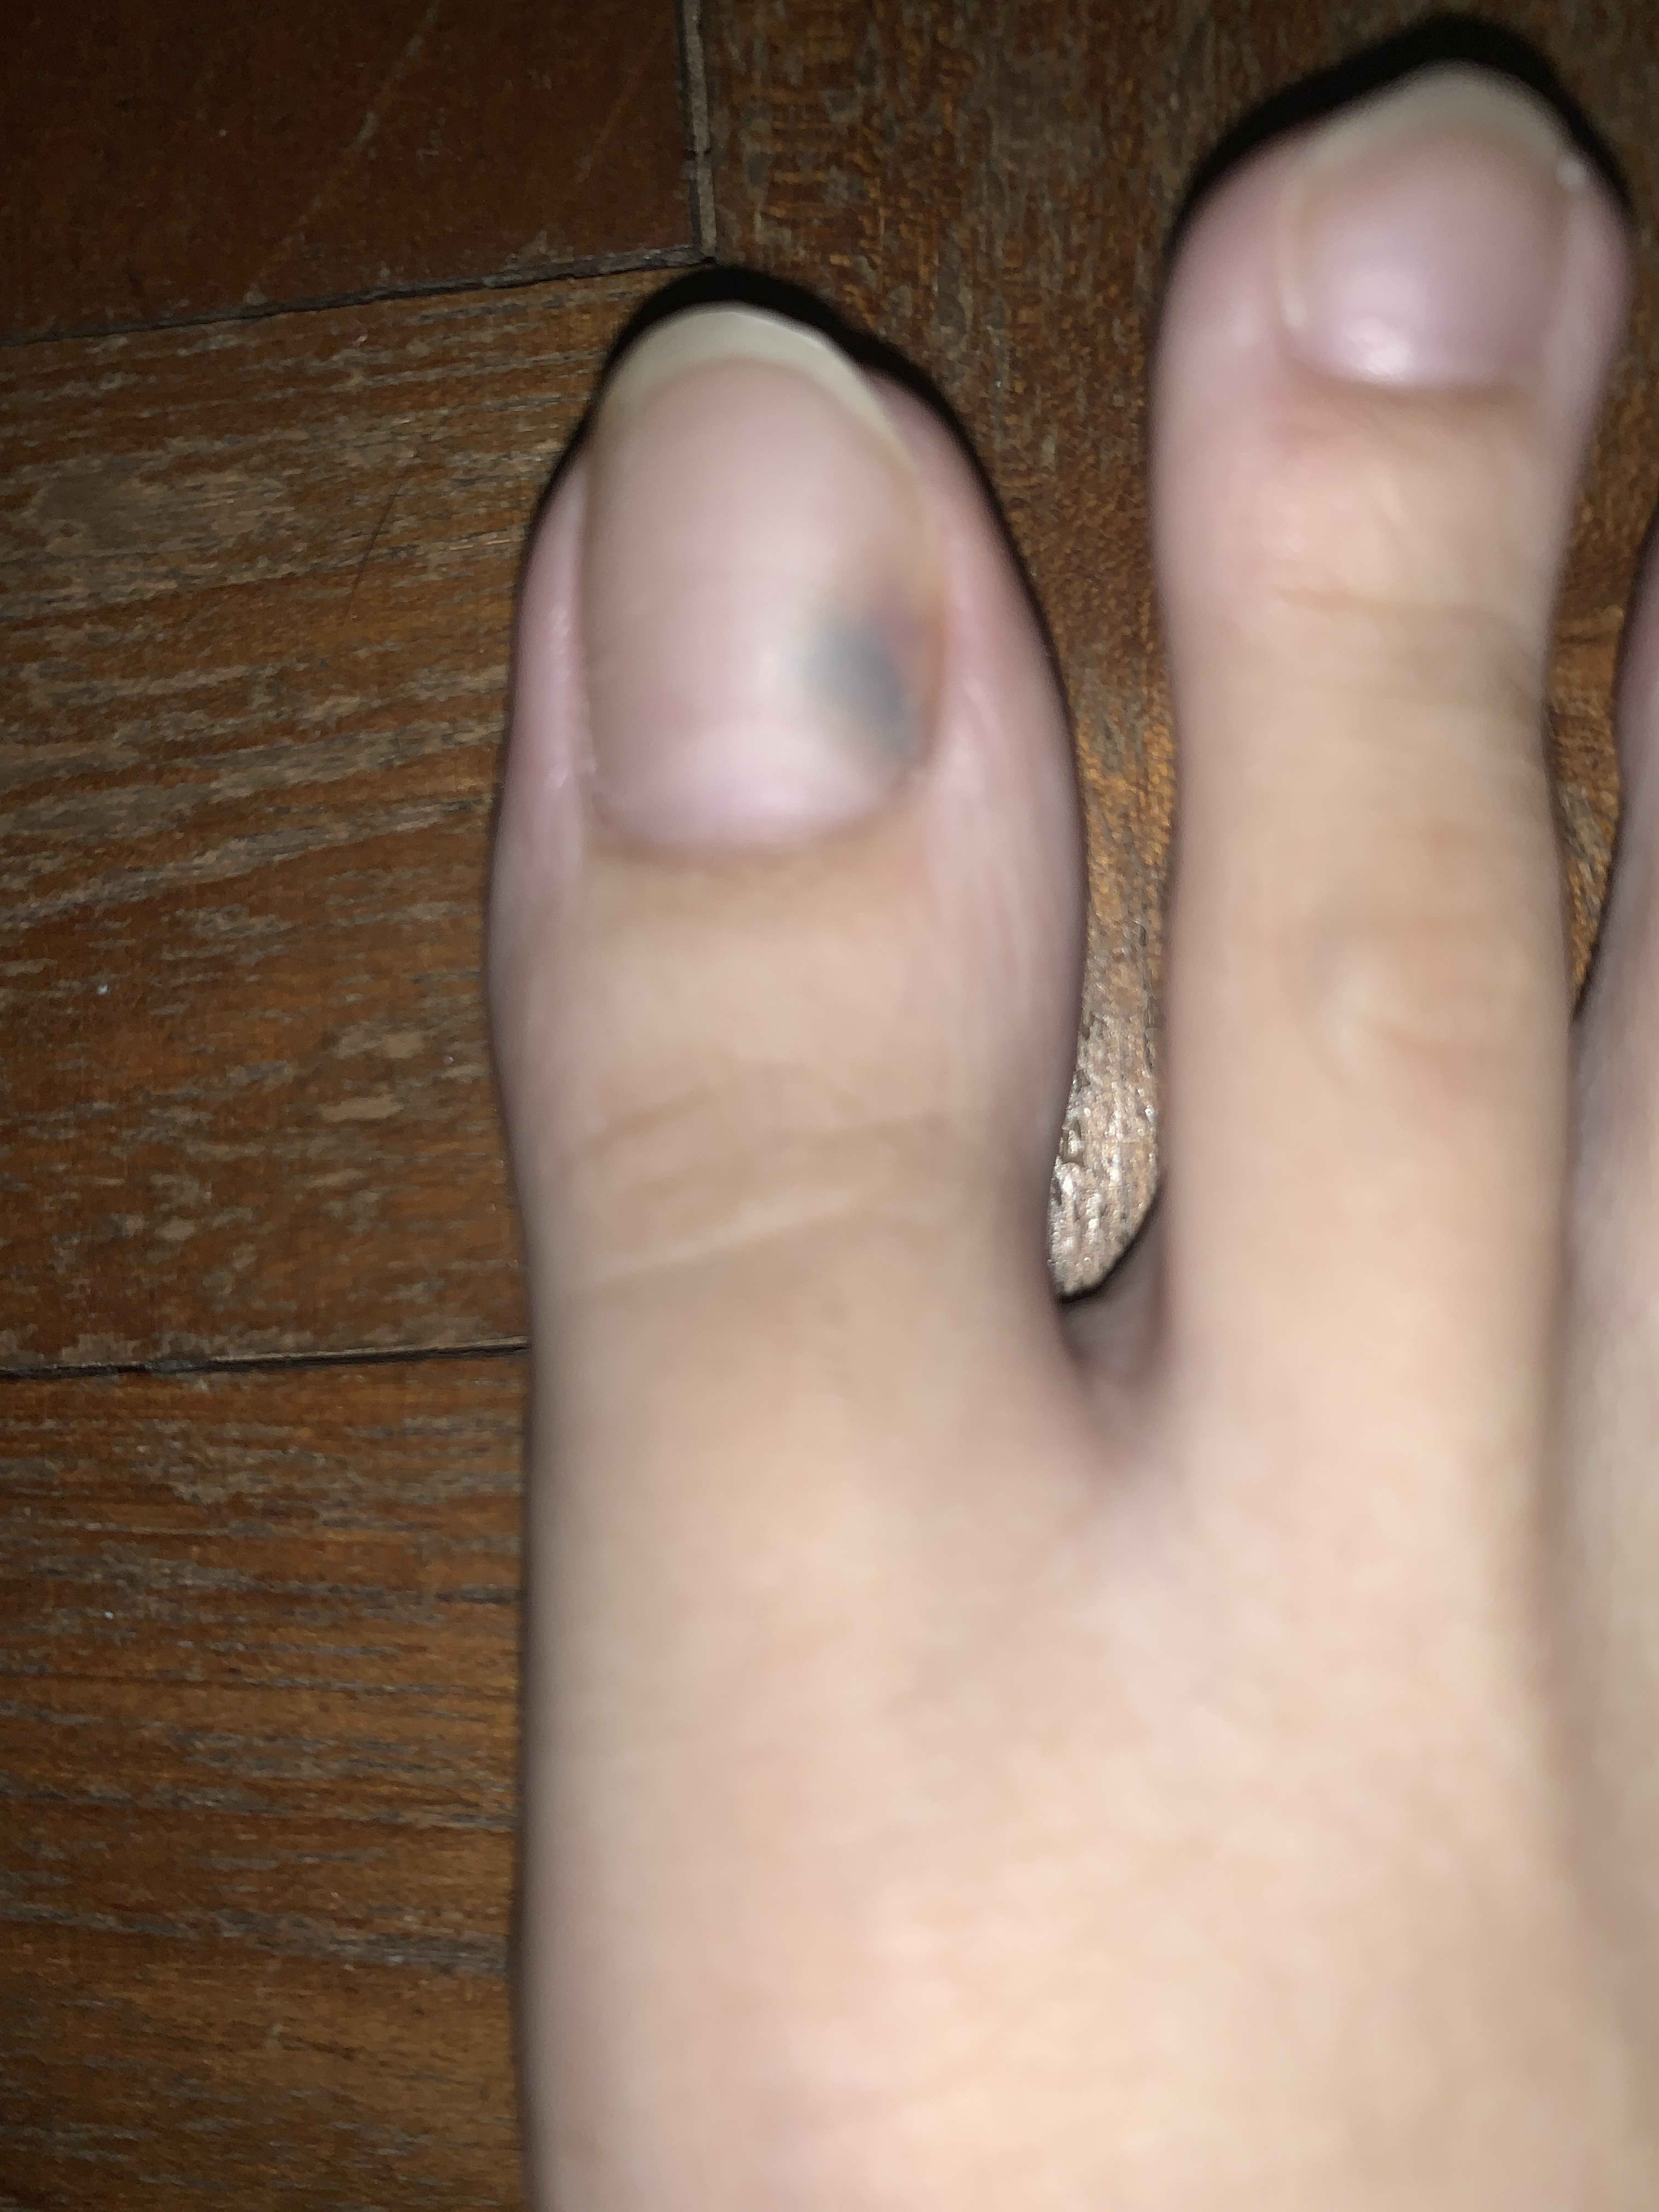 How can I tell if my toenail has a blood clot from injury or fungal  infection? (Photo) - human